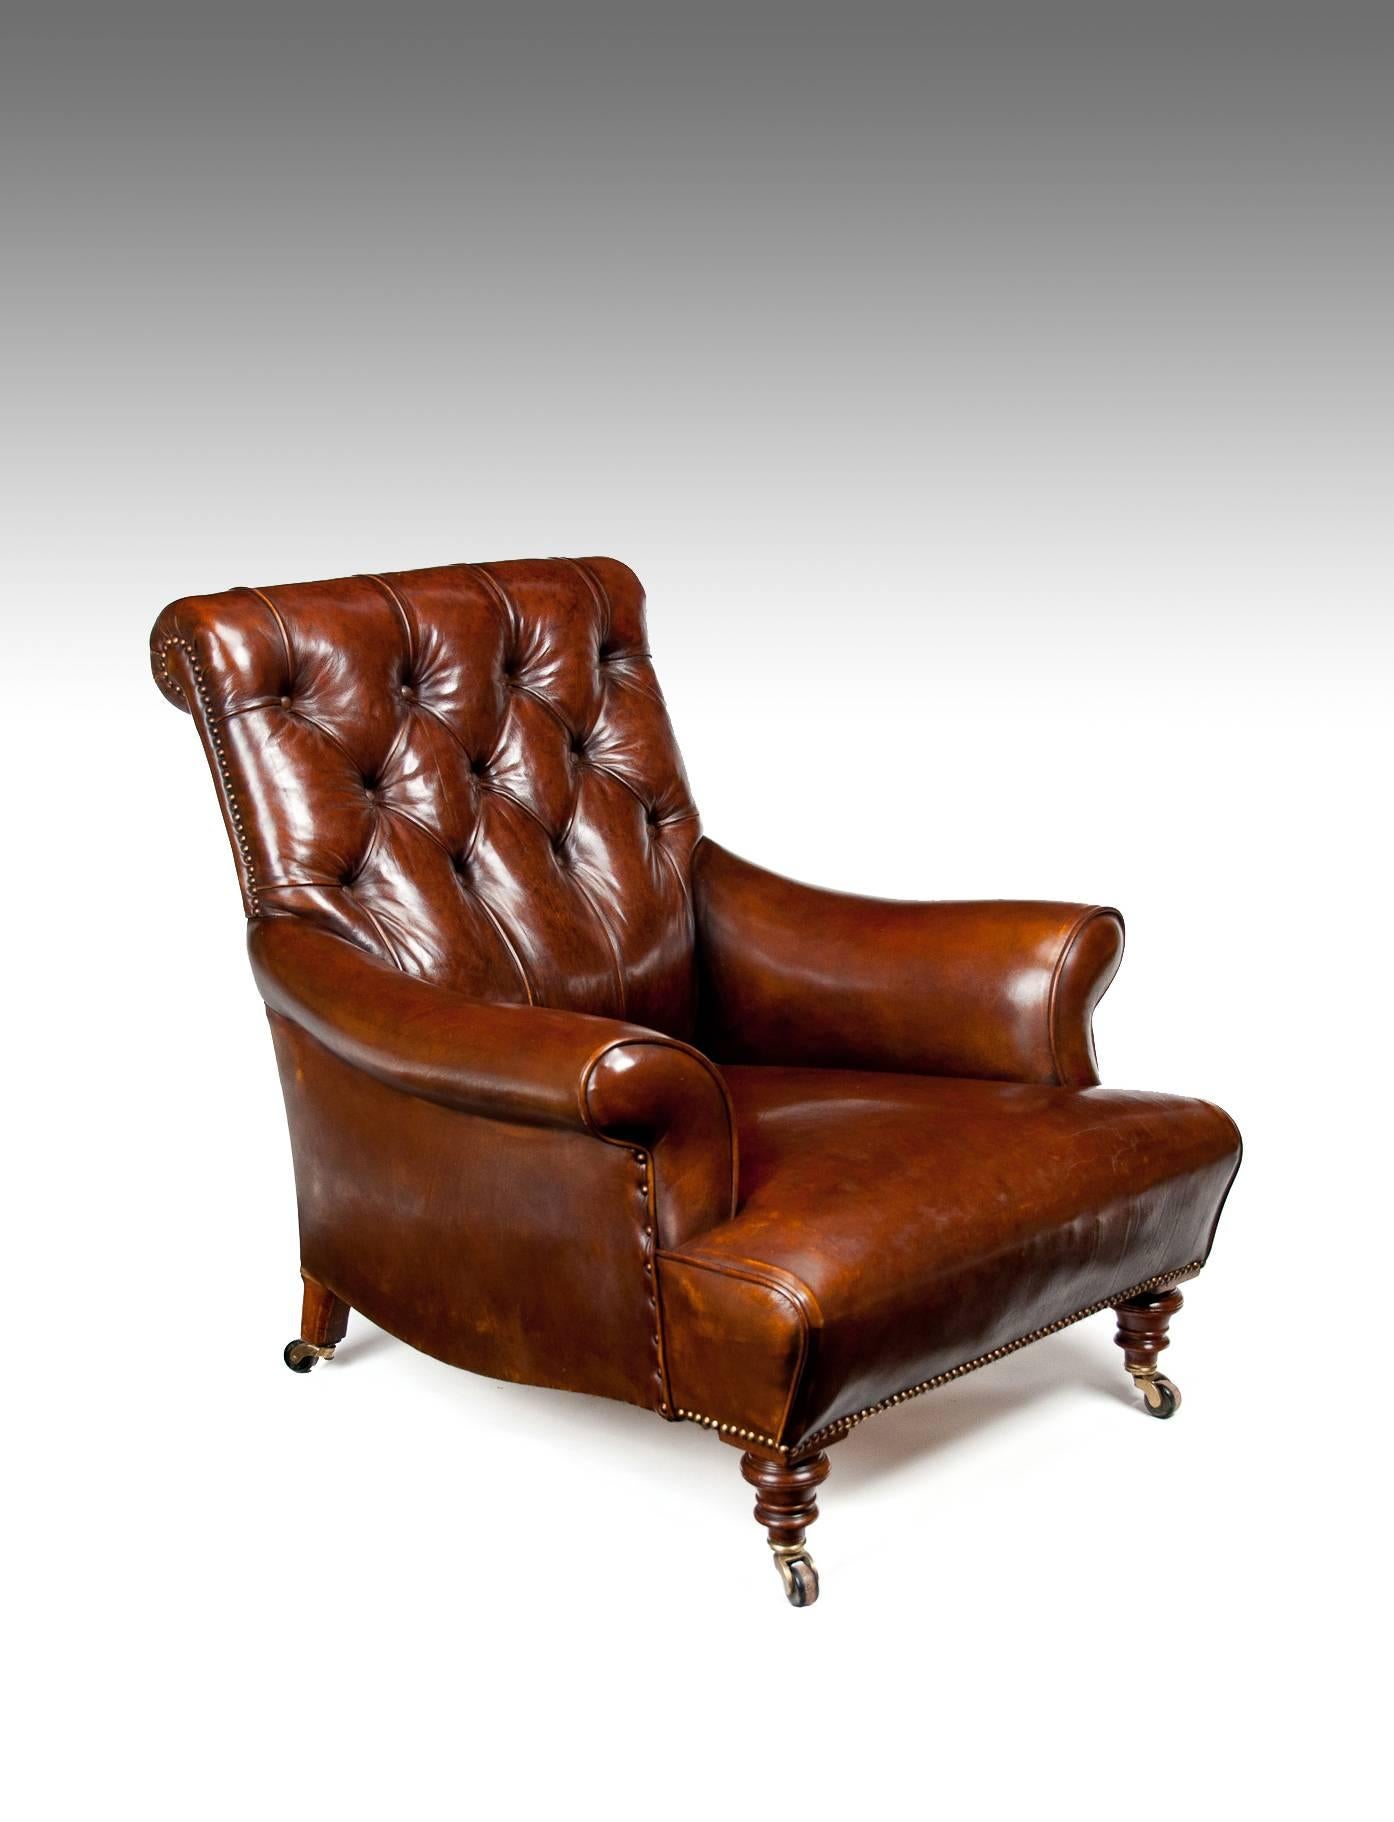 A fine quality 19th century Victorian leather upholstered armchair on walnut legs possibly by Jas Shoolbread, circa 1880.

Having a deep buttoned leather upholstered back and scrolled armrests with a sprung seat raised on turned solid walnut front